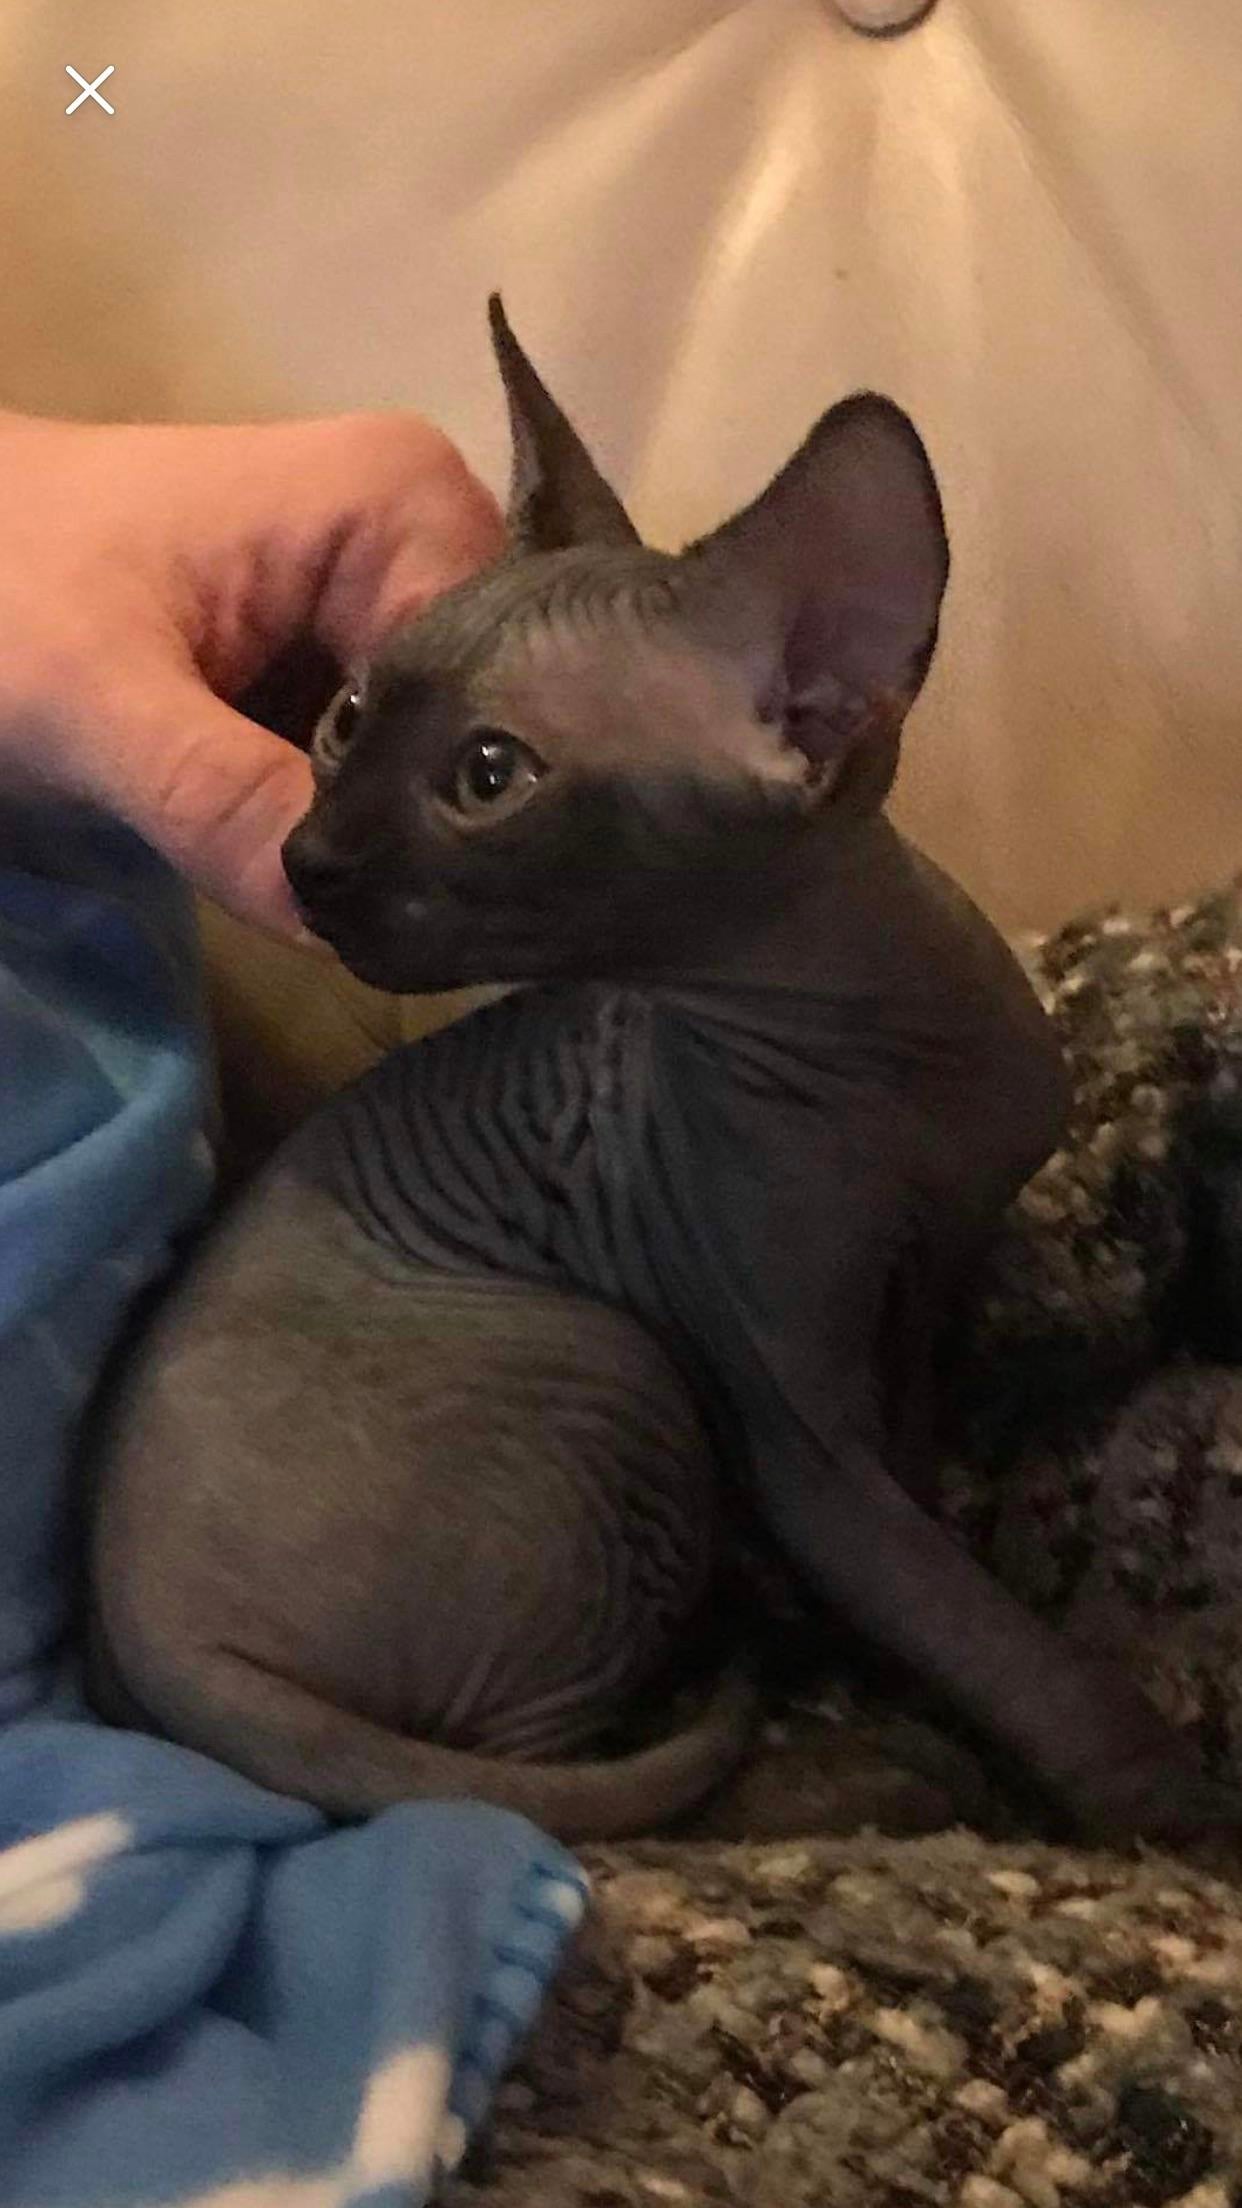 Why are hairless cats bad?